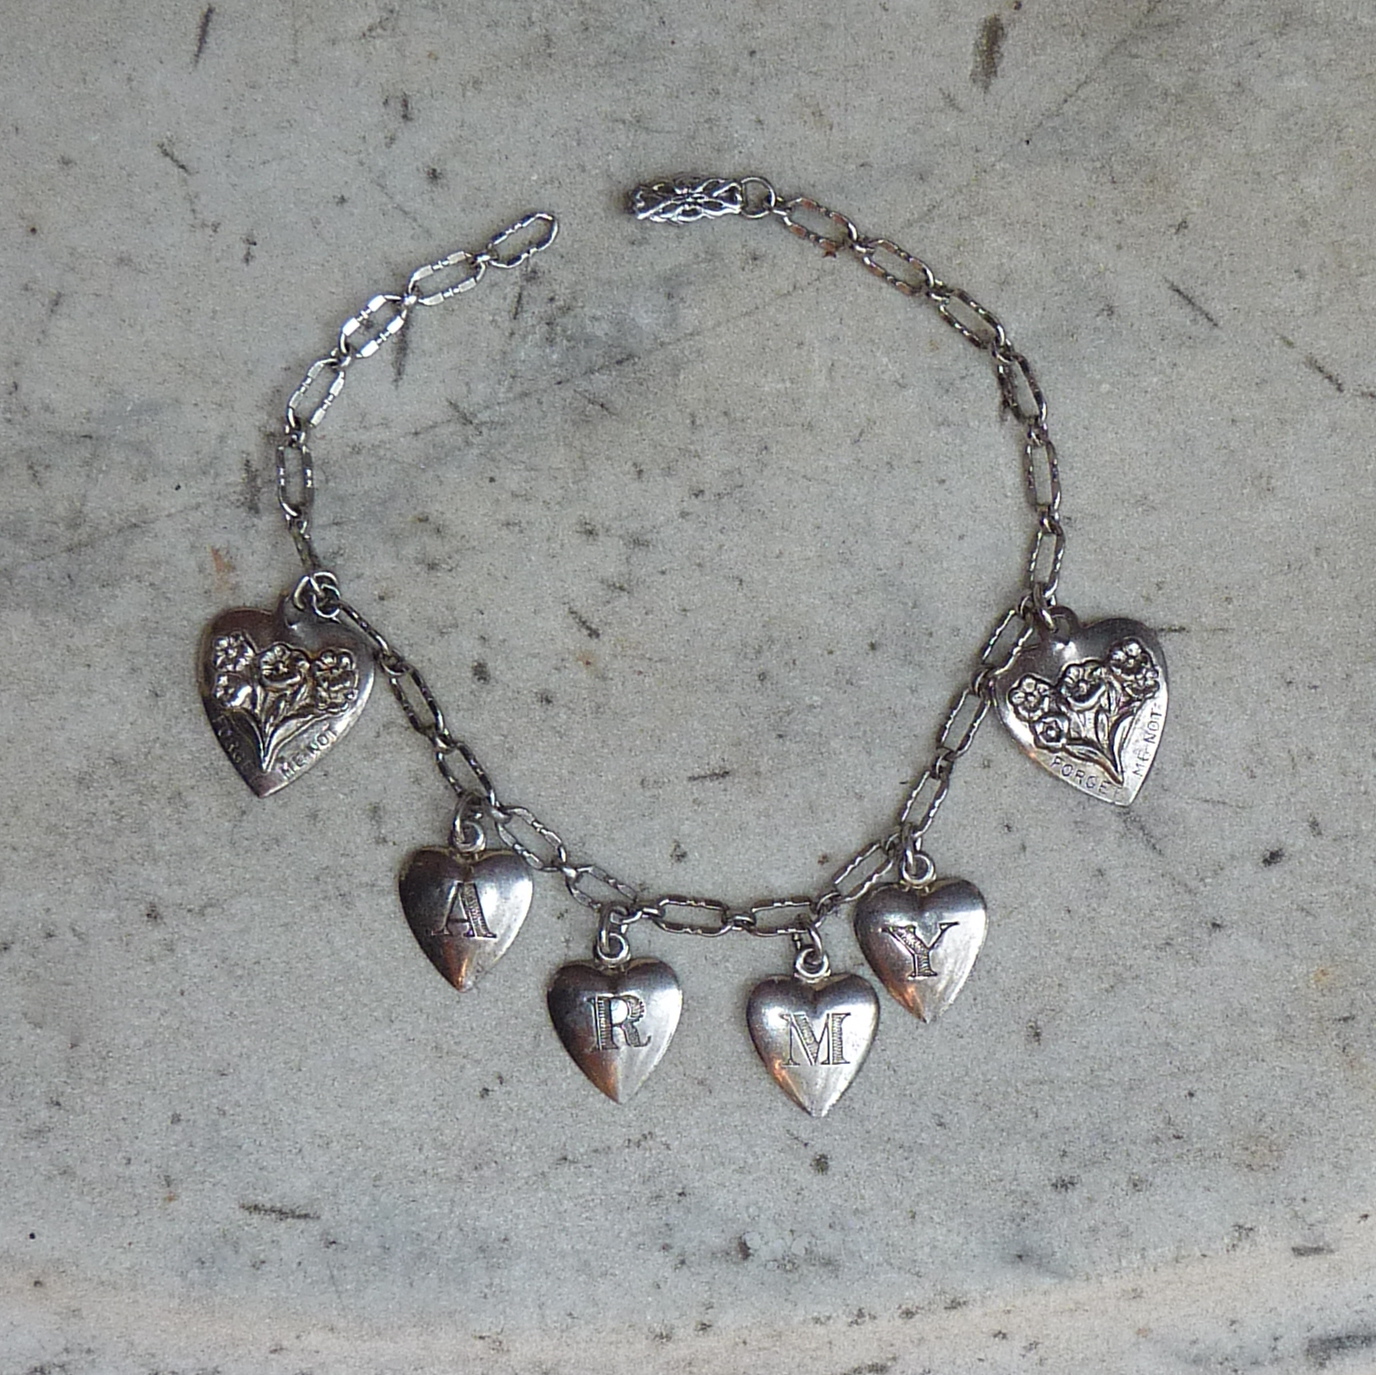 Vintage WWII ARMY Sweet Heart Bracelet with Forget Me Not Flowers —  Worn-Over-Time